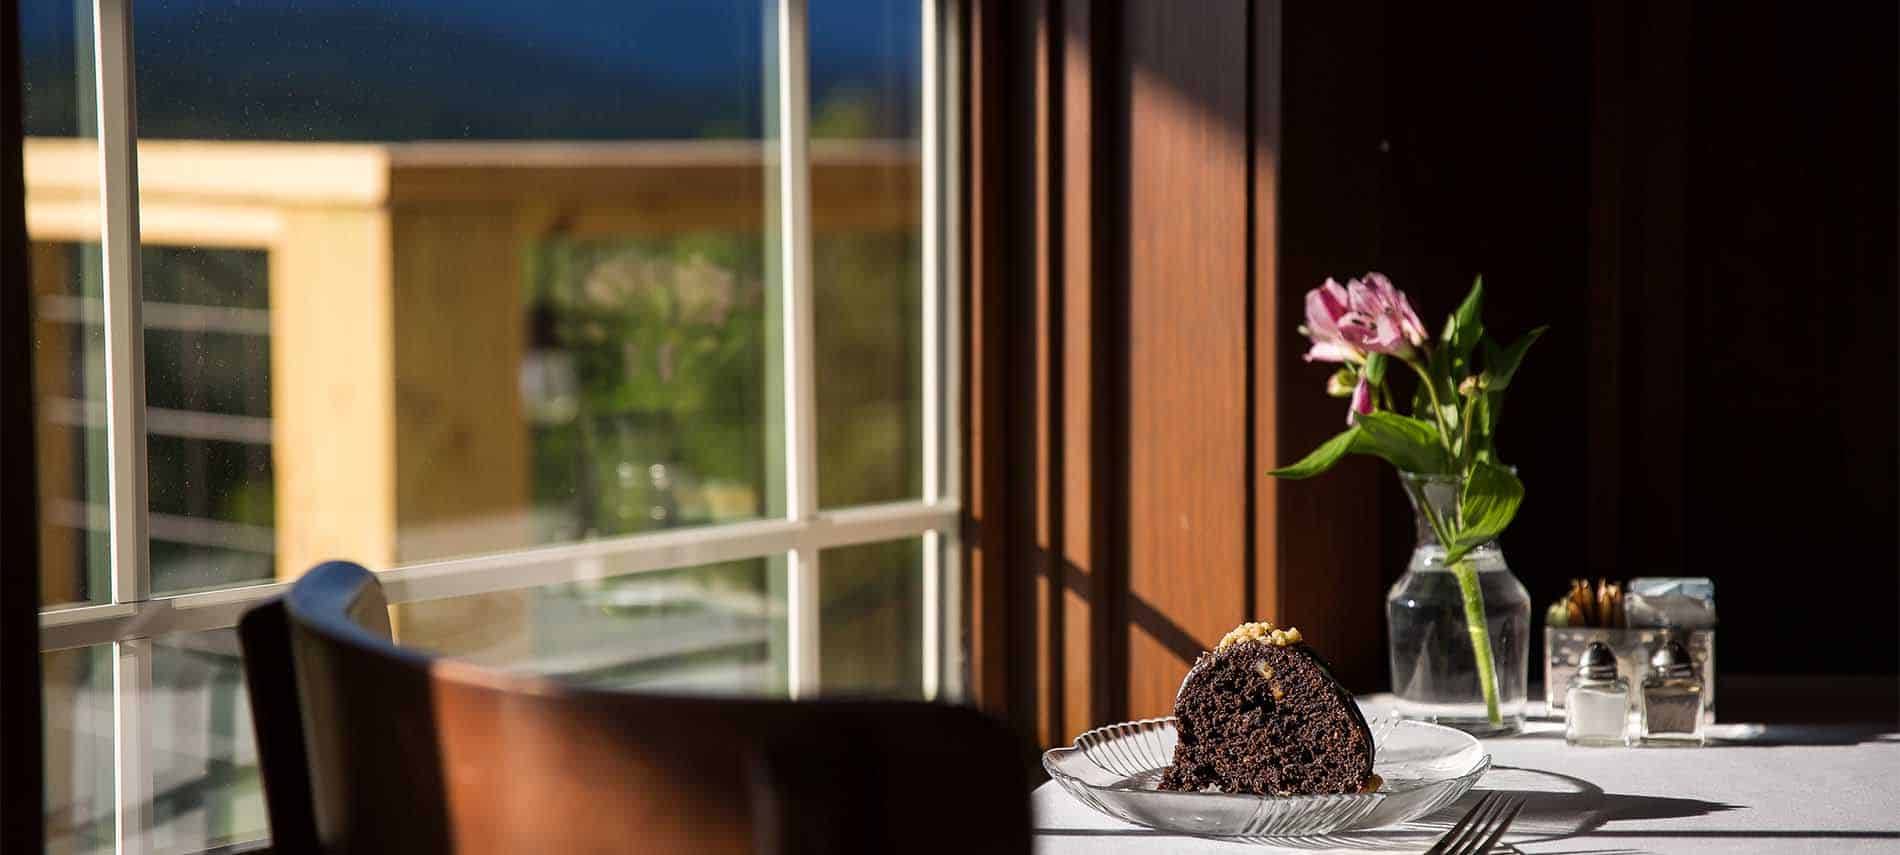 Chocolate cake on a glass plate, on a table with floral centerpiece, in a window with intentional focal blur.